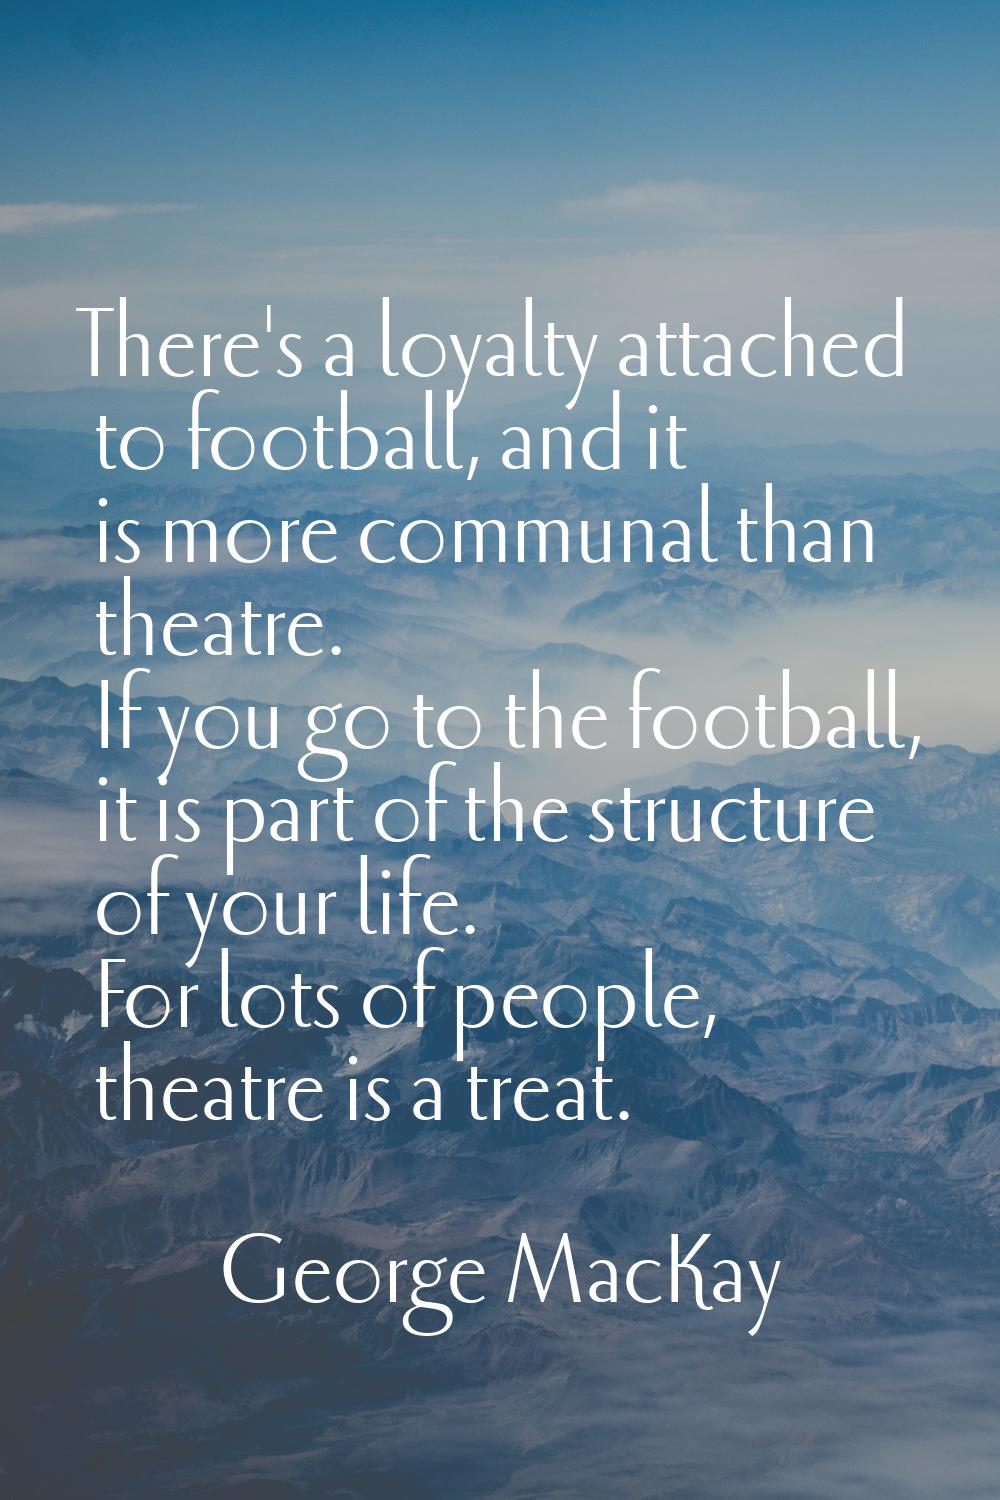 There's a loyalty attached to football, and it is more communal than theatre. If you go to the foot